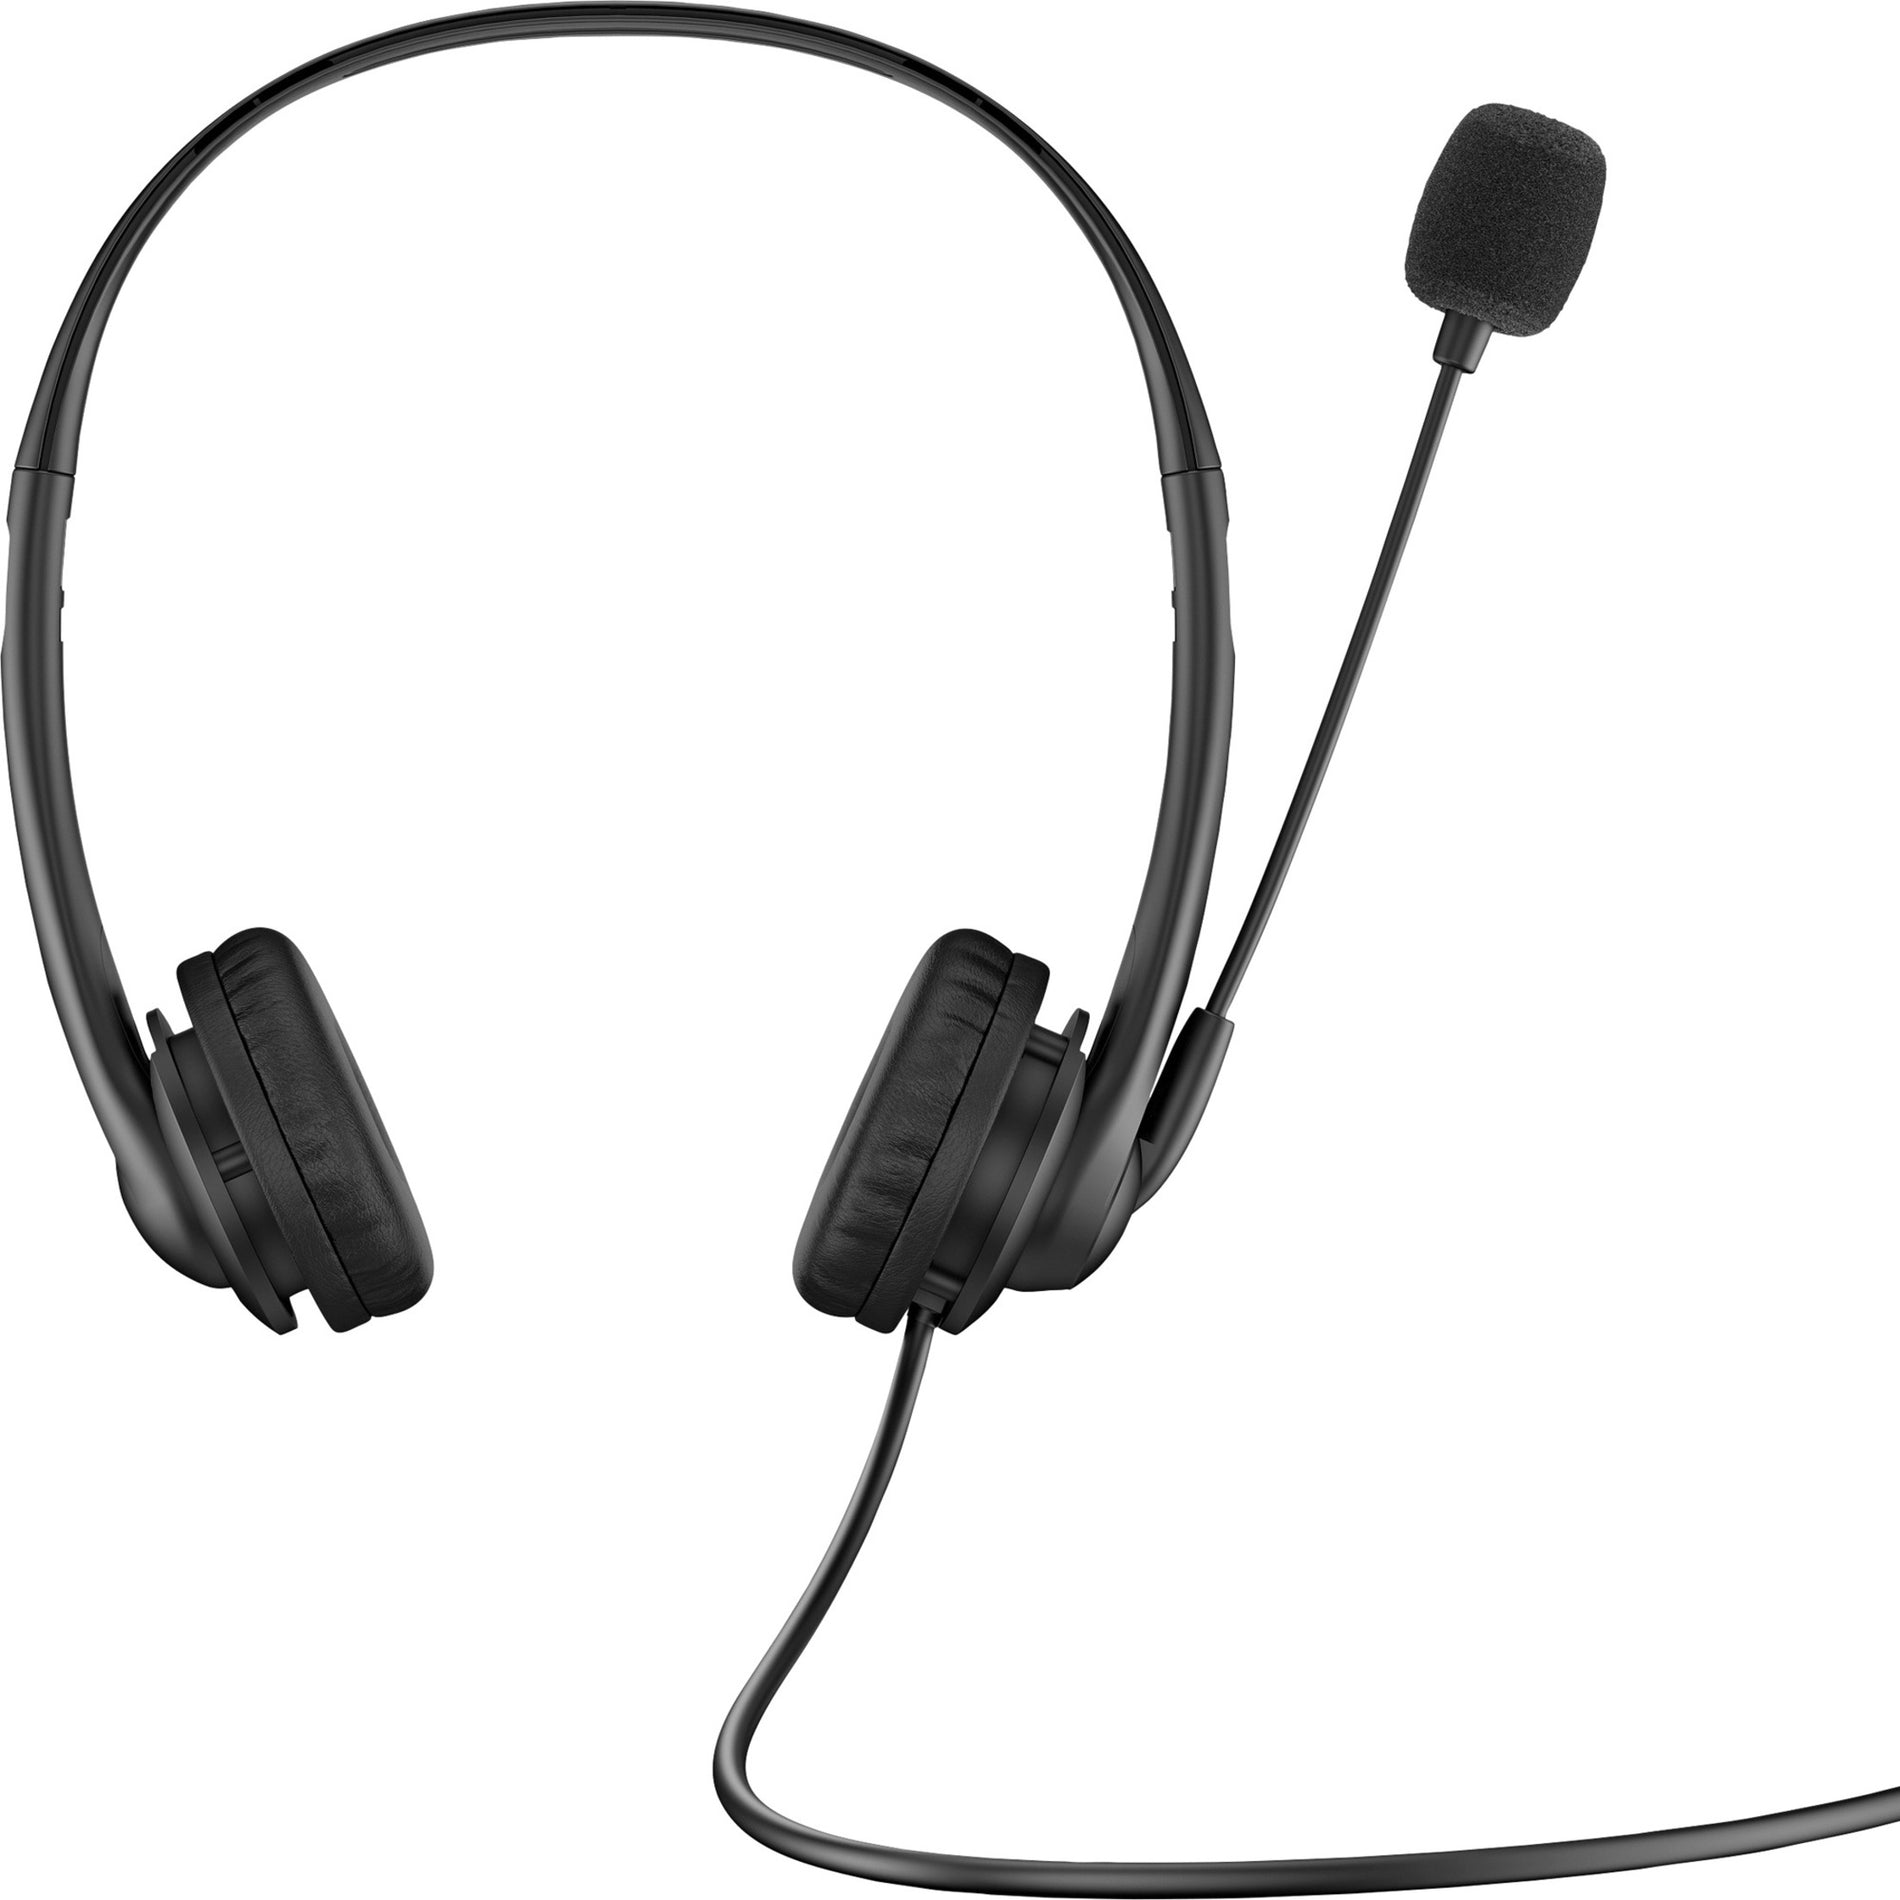 HP 428K6UT Stereo USB Headset G2, Comfortable, Plug and Play, Noise Canceling